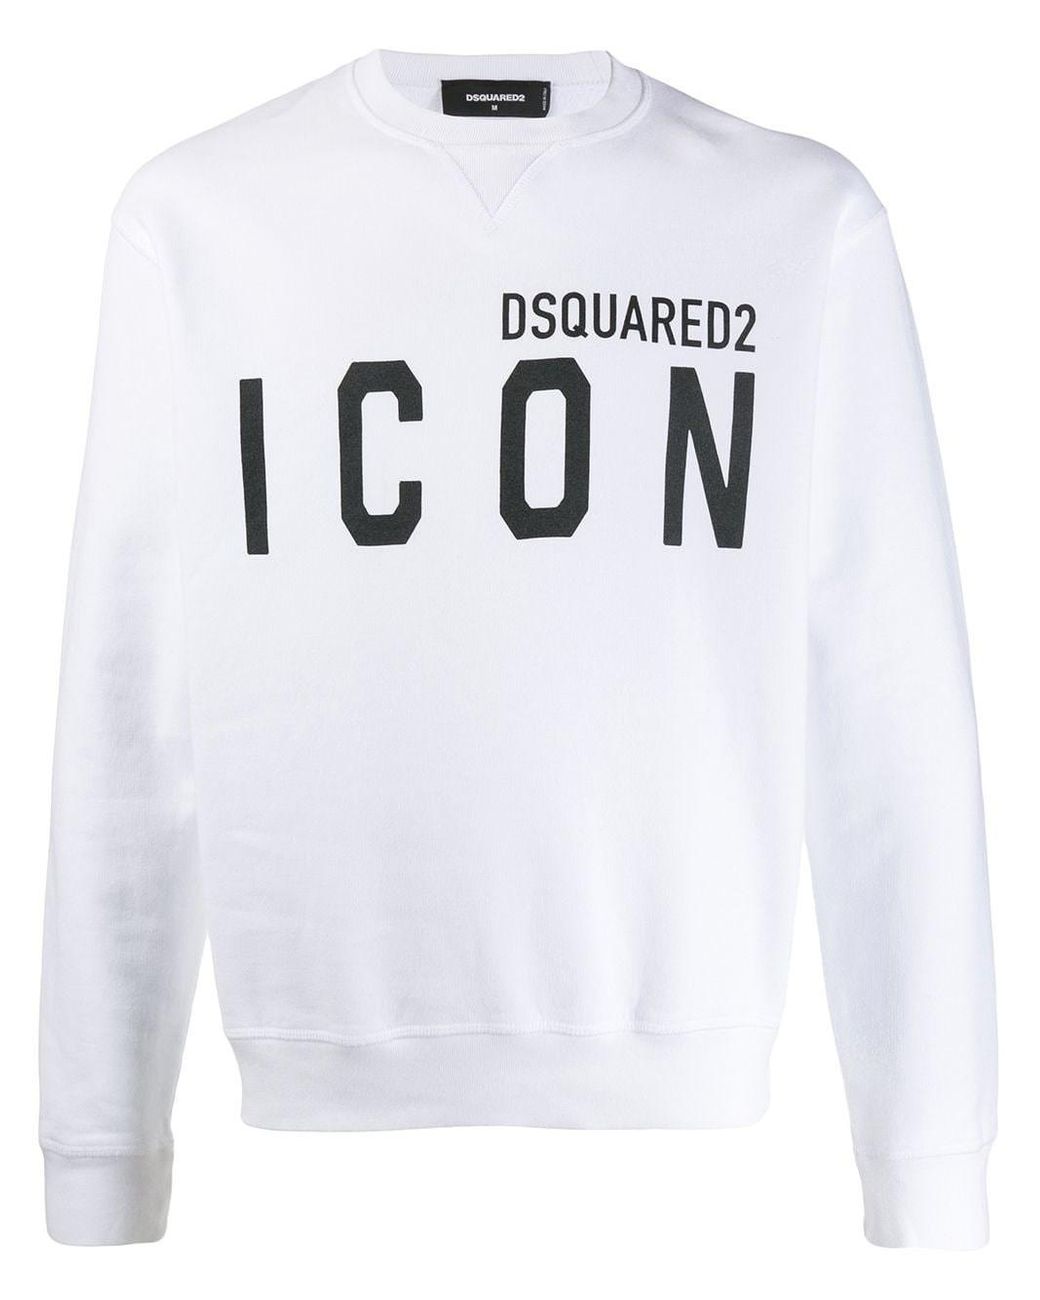 DSquared² Cotton 'icon' Sweatshirt in White for Men - Lyst